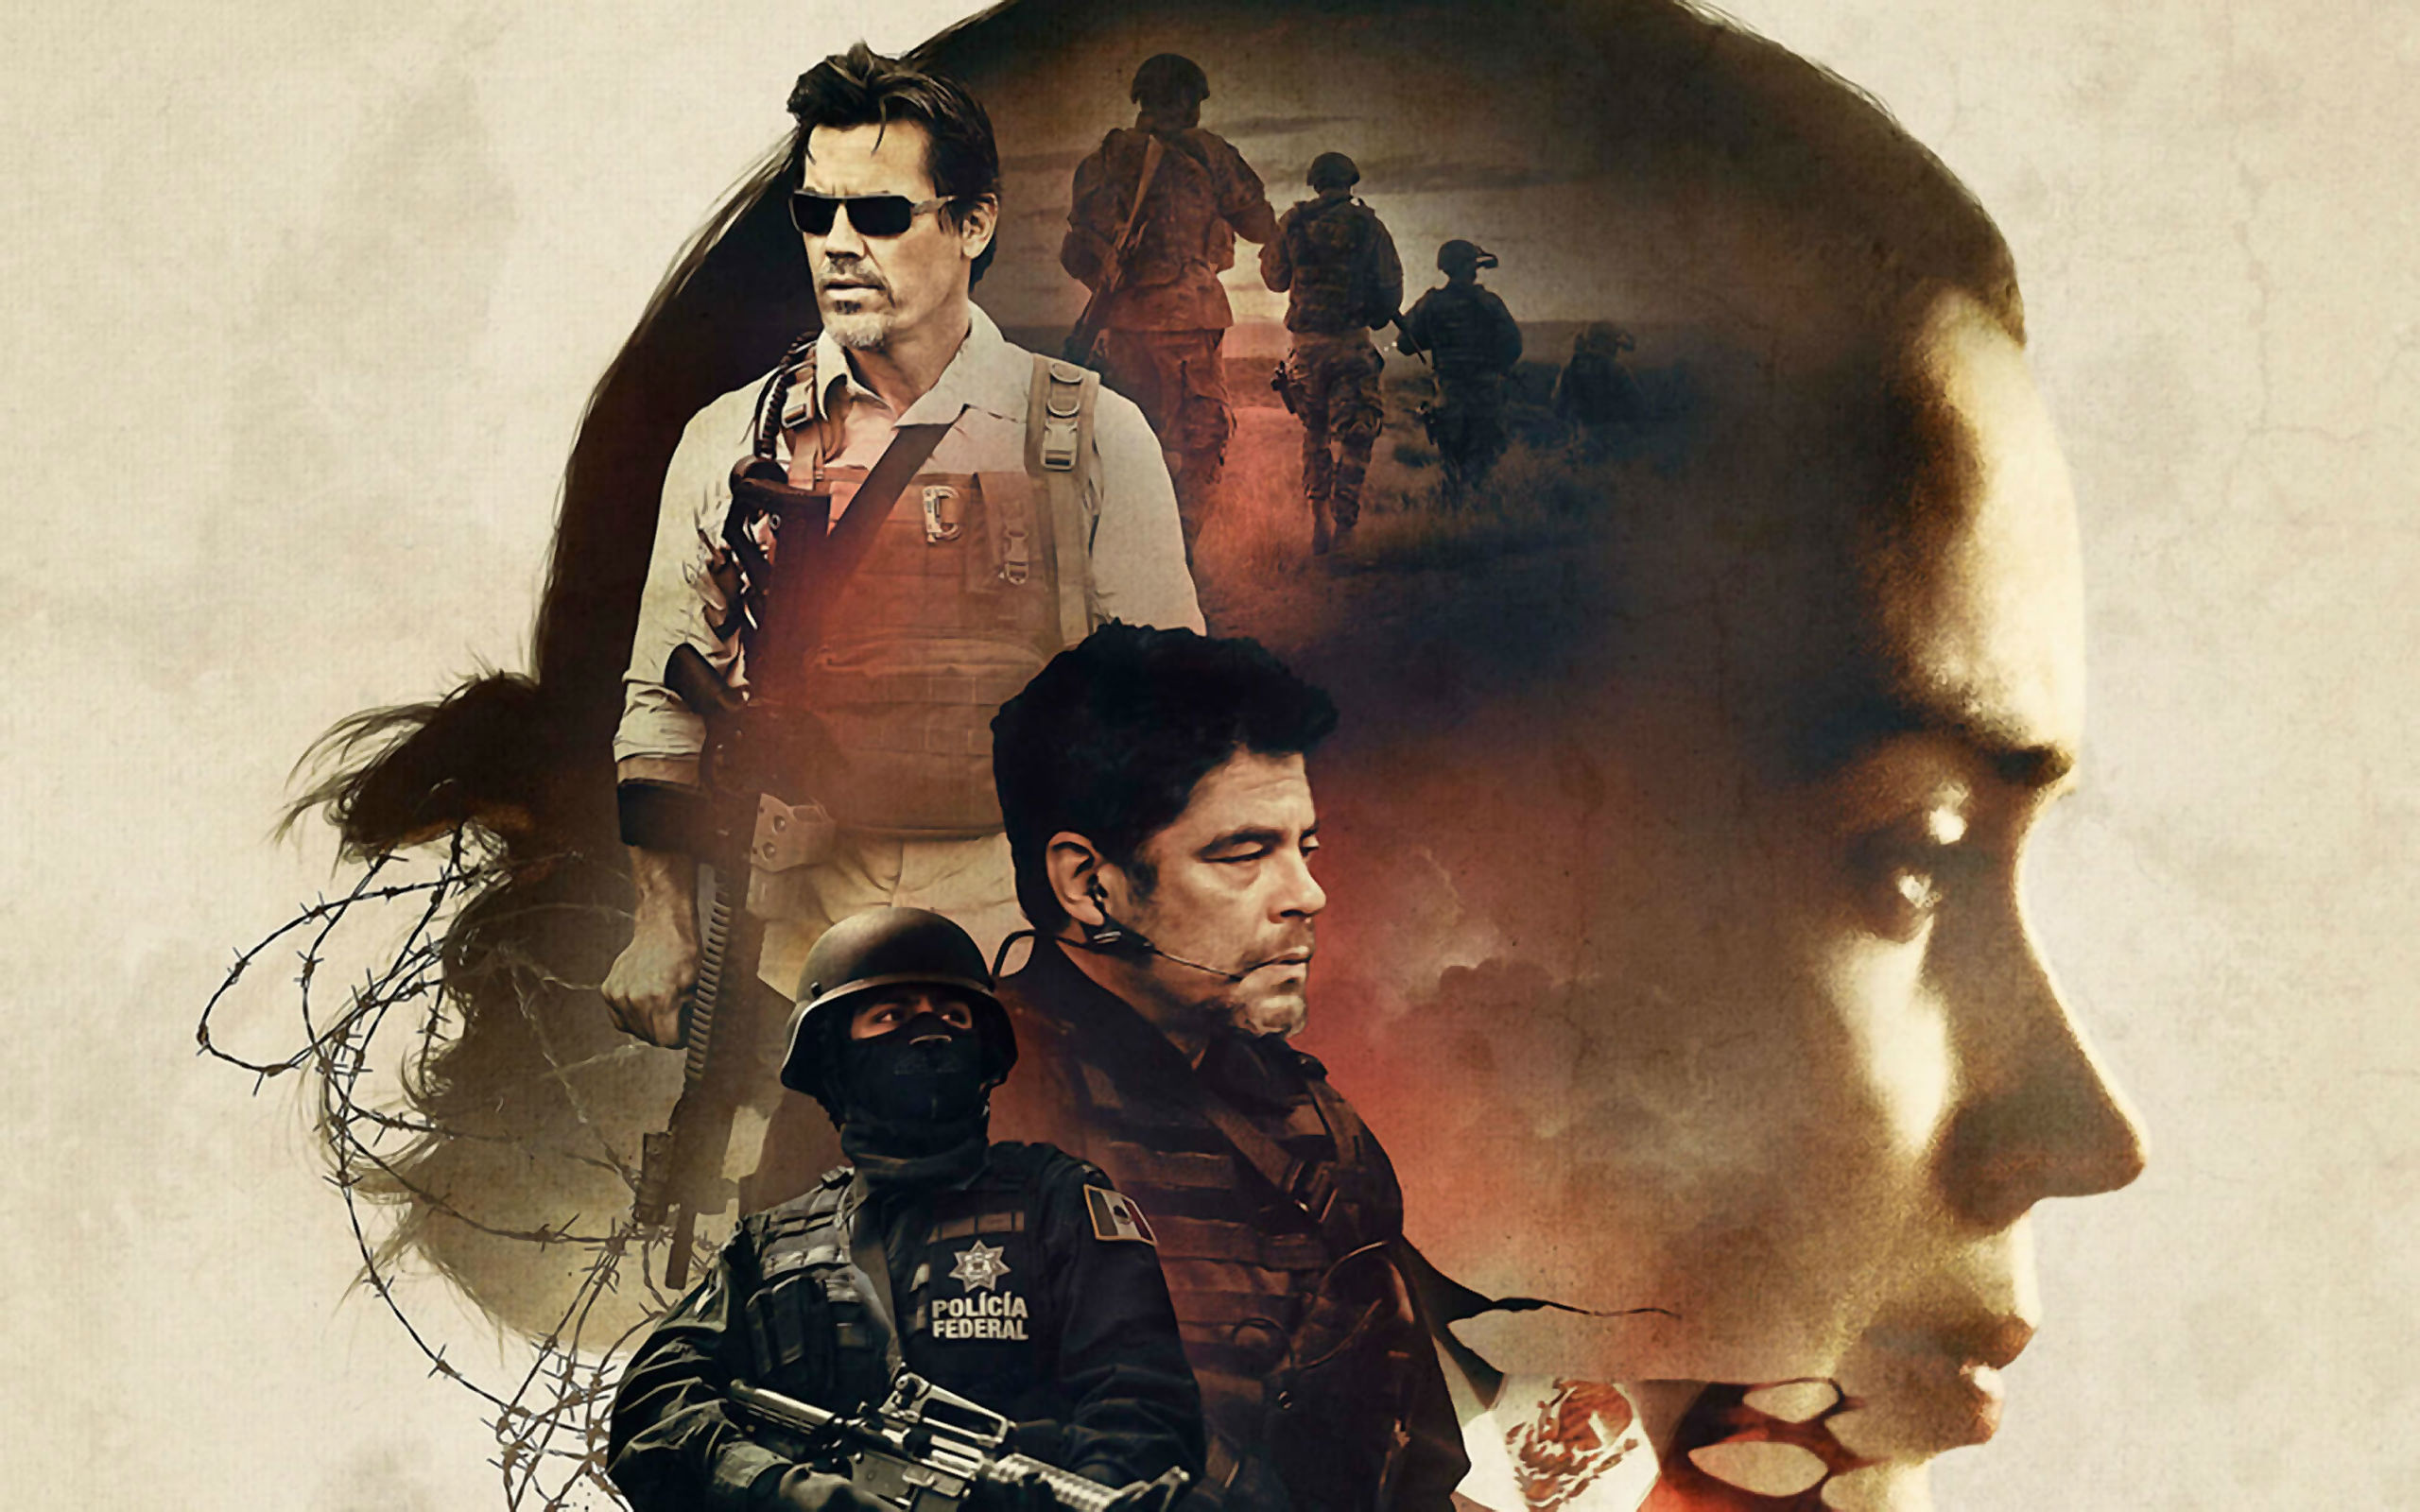 Sicario wallpapers, Movie collection, High-quality images, 4K resolution, 2560x1600 HD Desktop